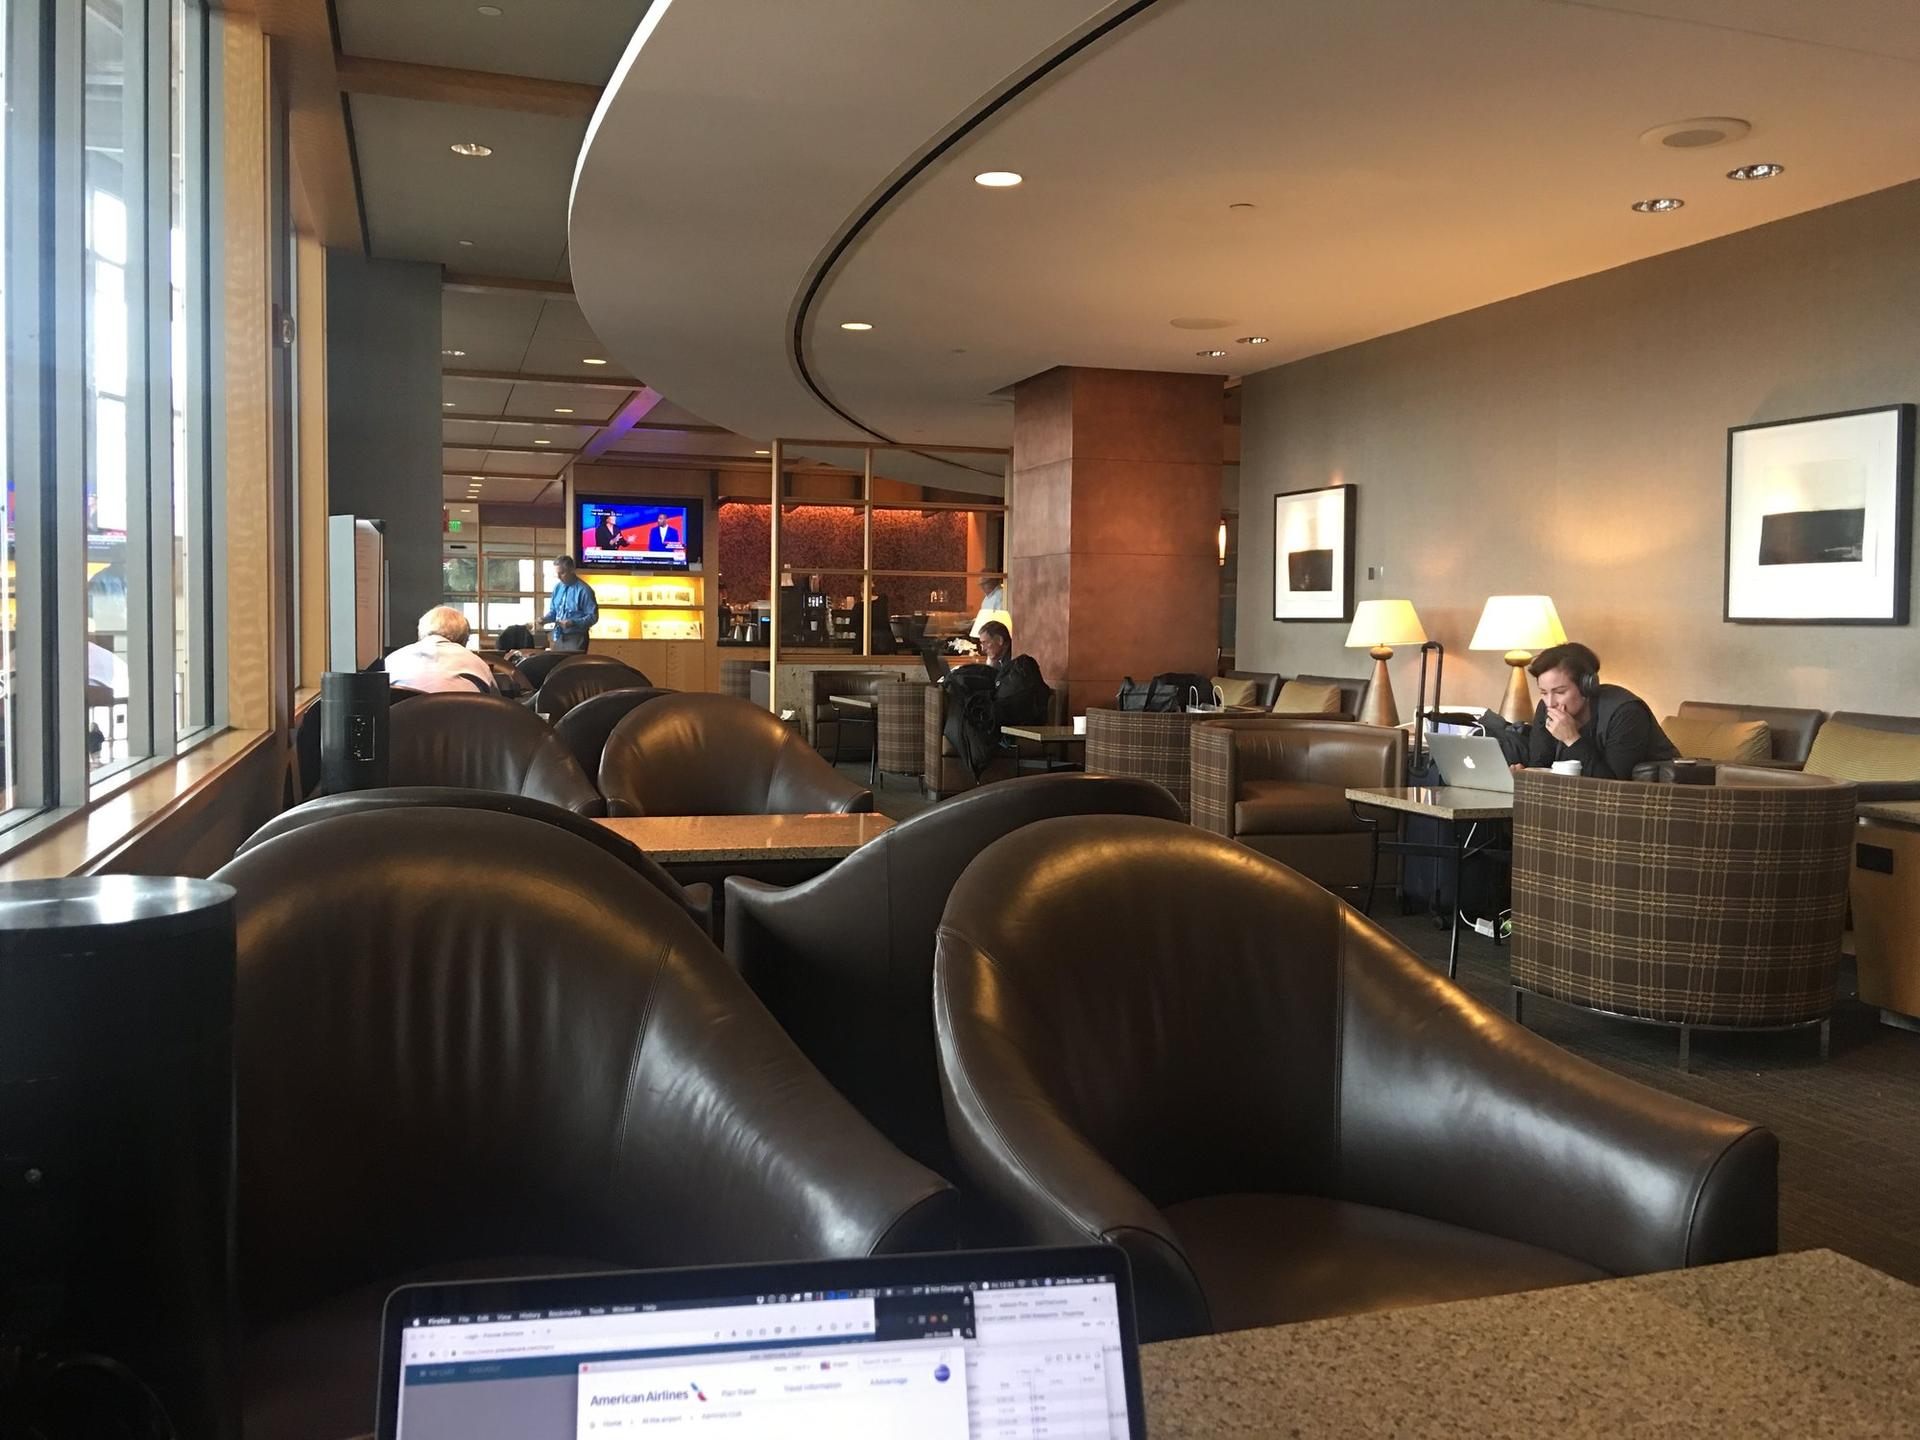 American Airlines Admirals Club image 14 of 14